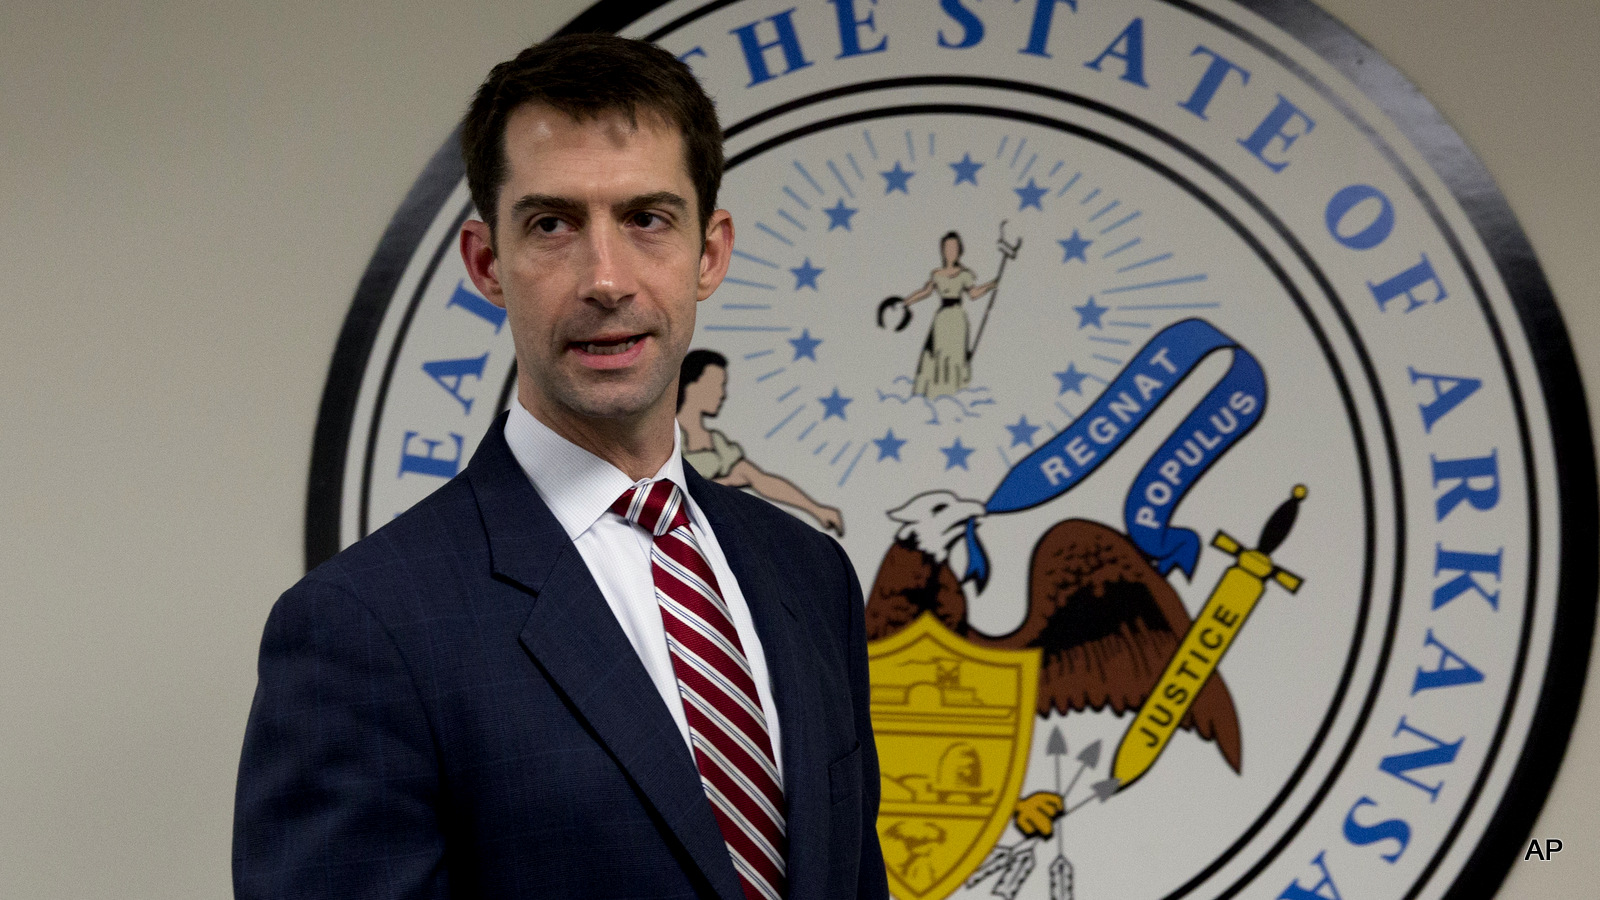 Sen. Tom Cotton, R-Ark. arrives to pose for photographers in his office on Capitol Hill in Washington, Wednesday, March 11, 2015. (AP Photo/Carolyn Kaster)